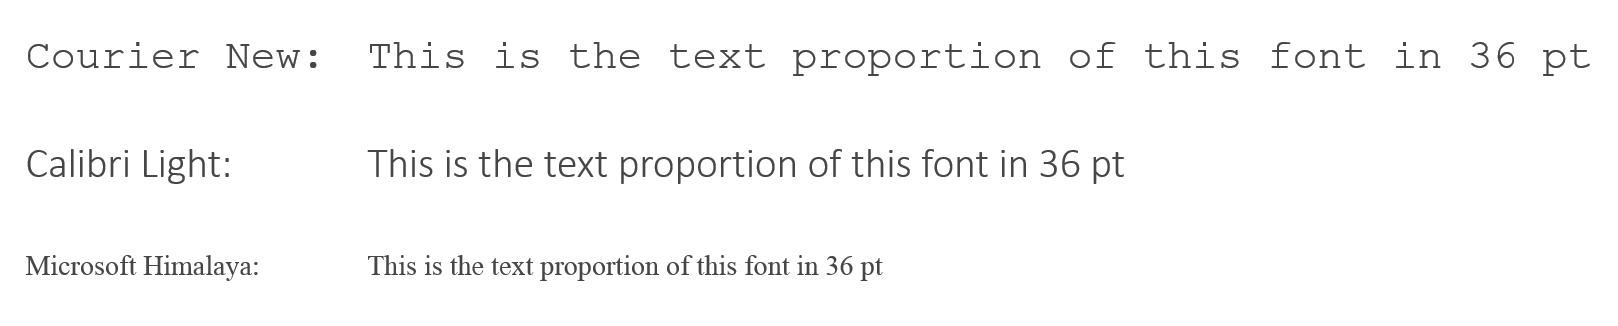 HiLo_Agency_Blog_Text proportions